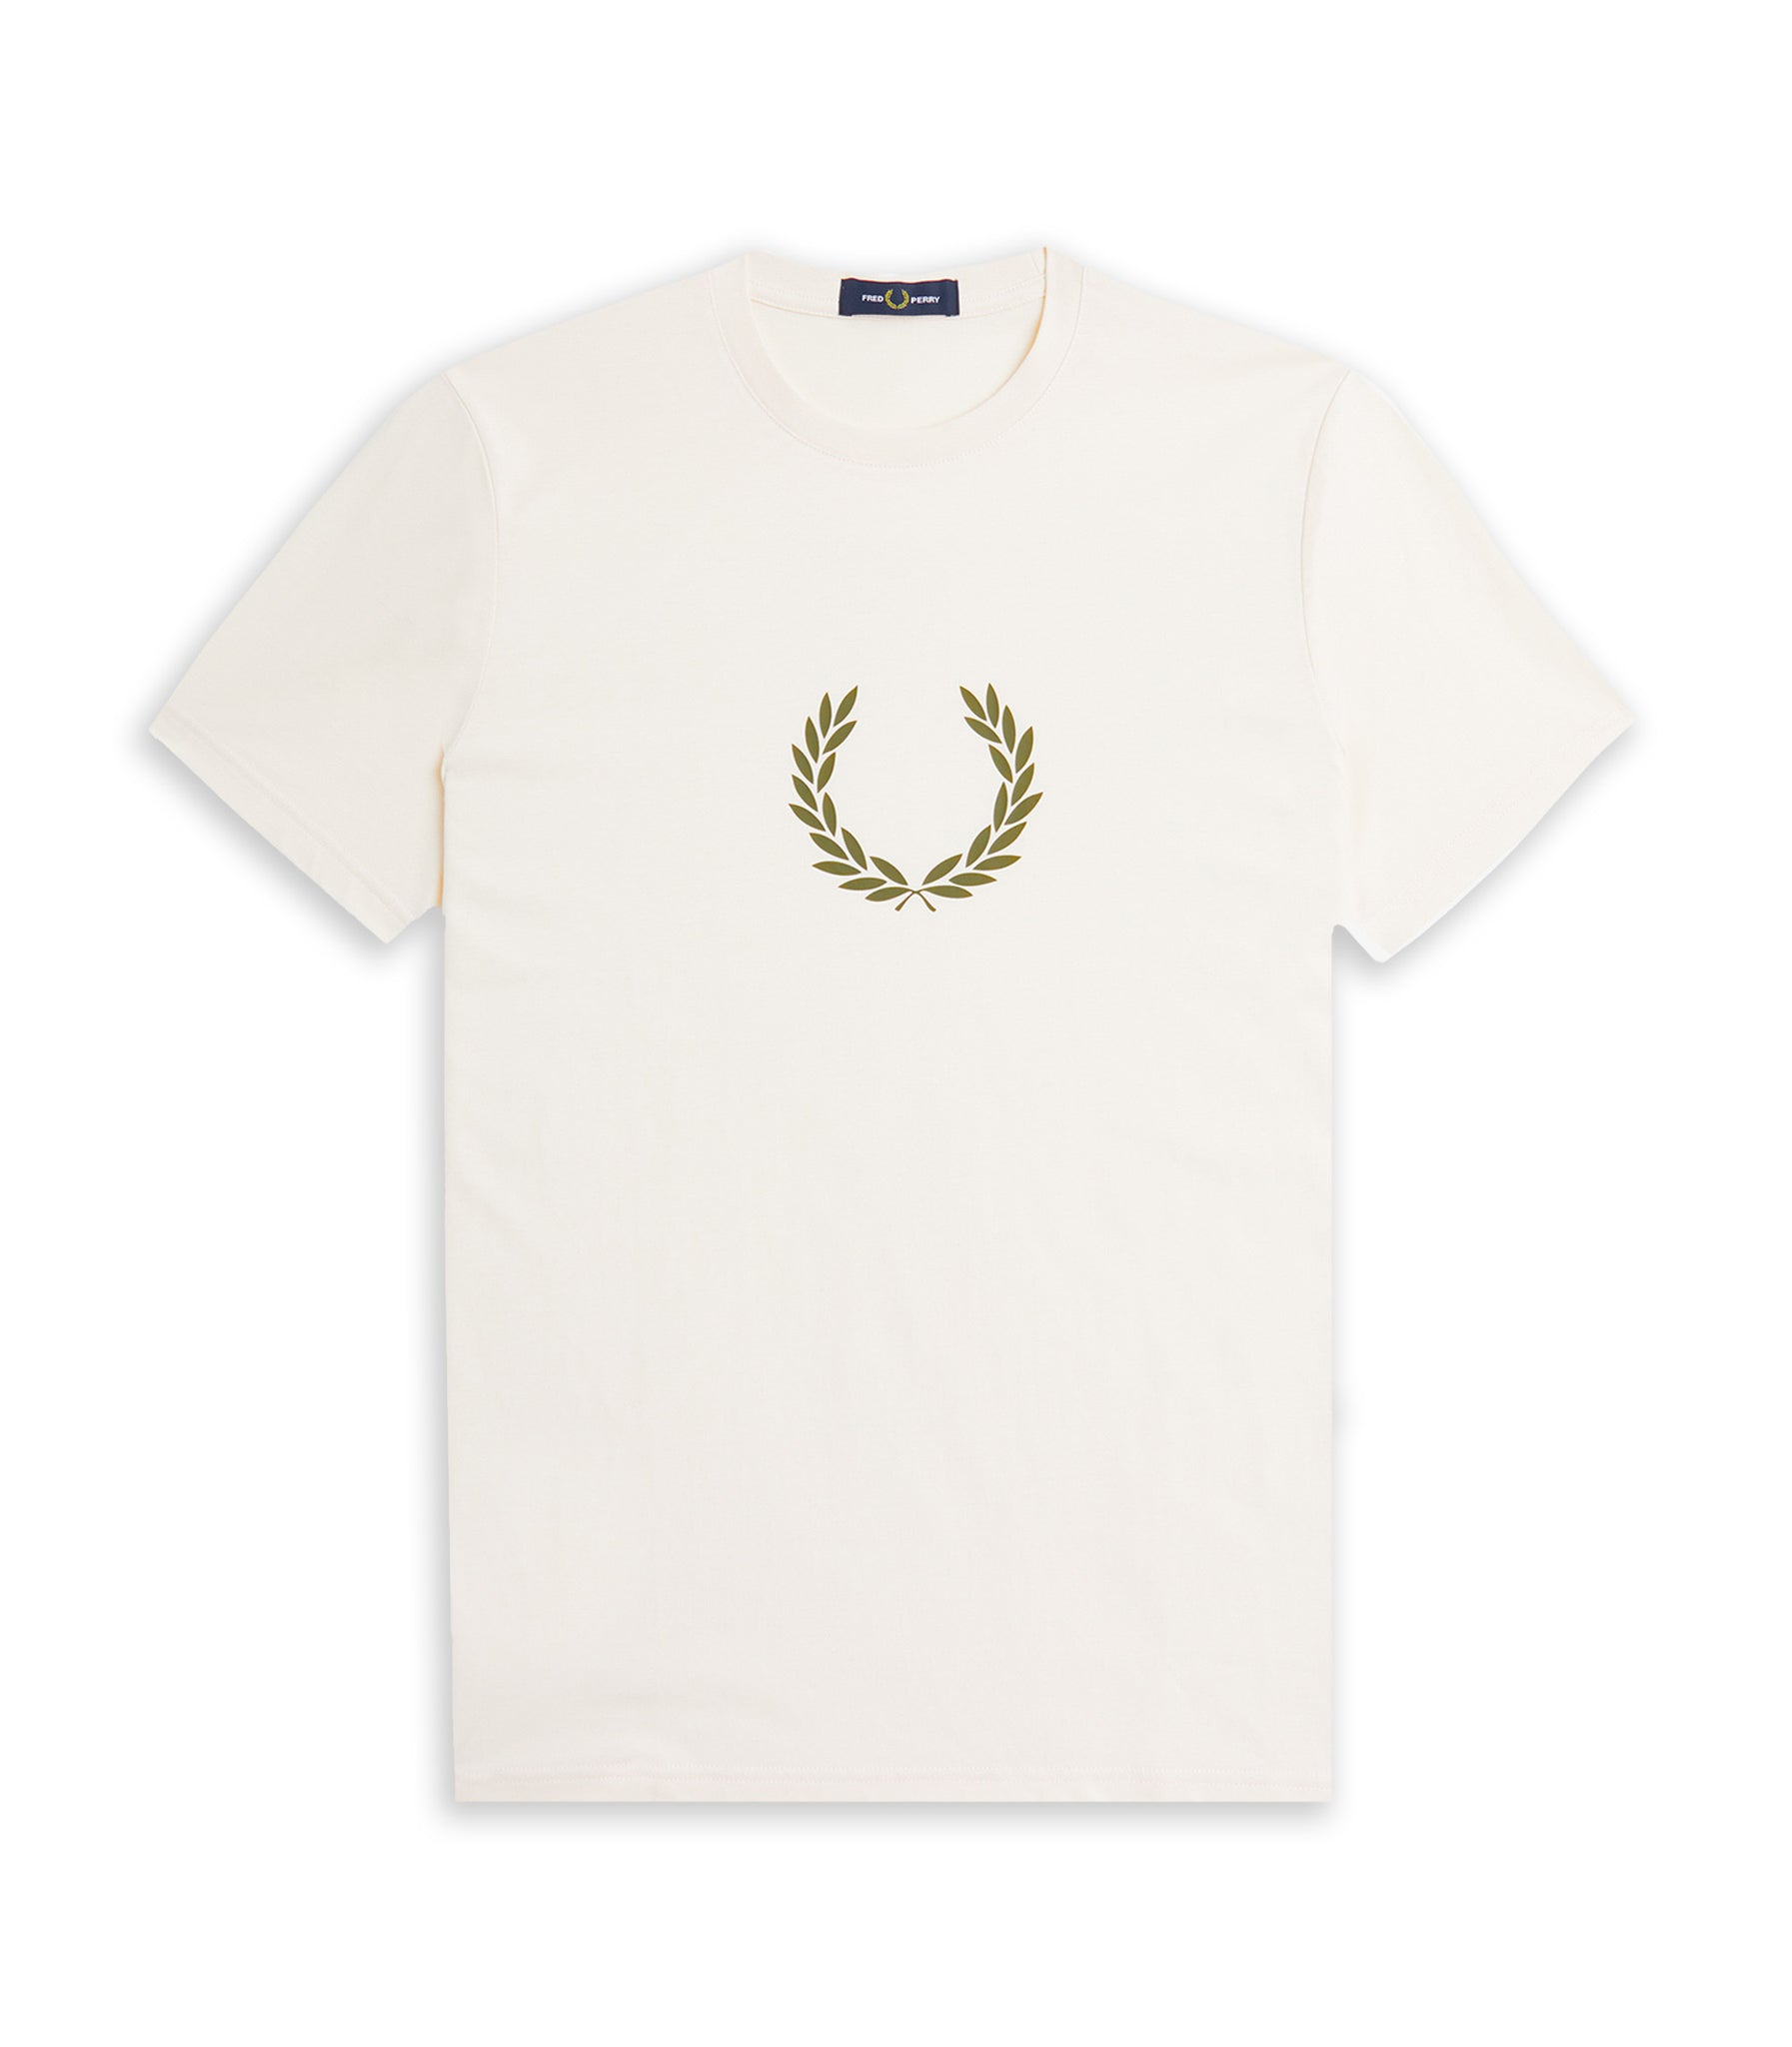 T-Shirt Fred Perry Laurel Wreath Pesca Uomo